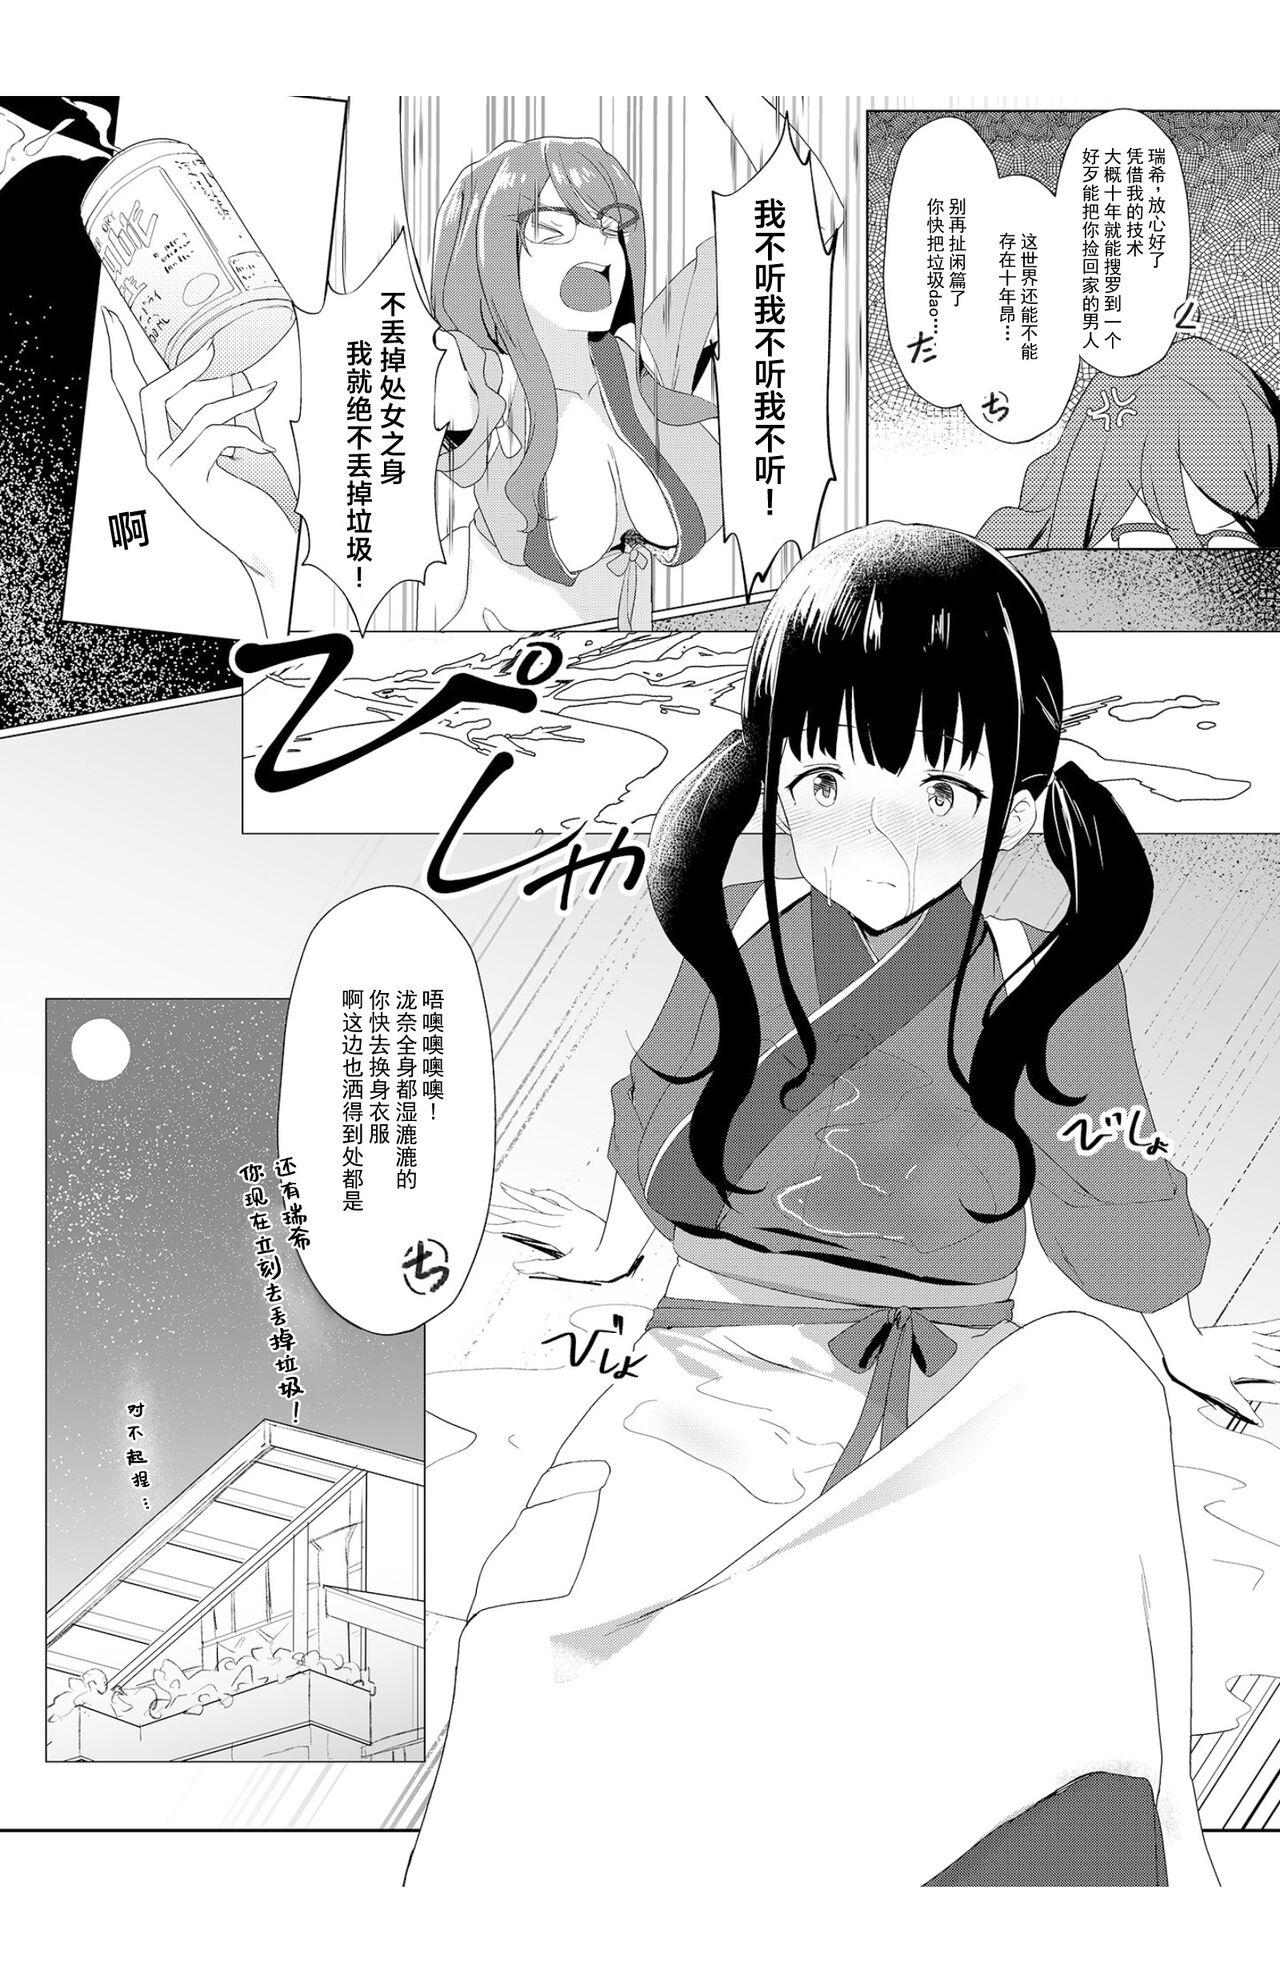 Ball Licking Kimi no Heartbeat | 你的心跳 heart beat - Lycoris recoil Relax - Page 4